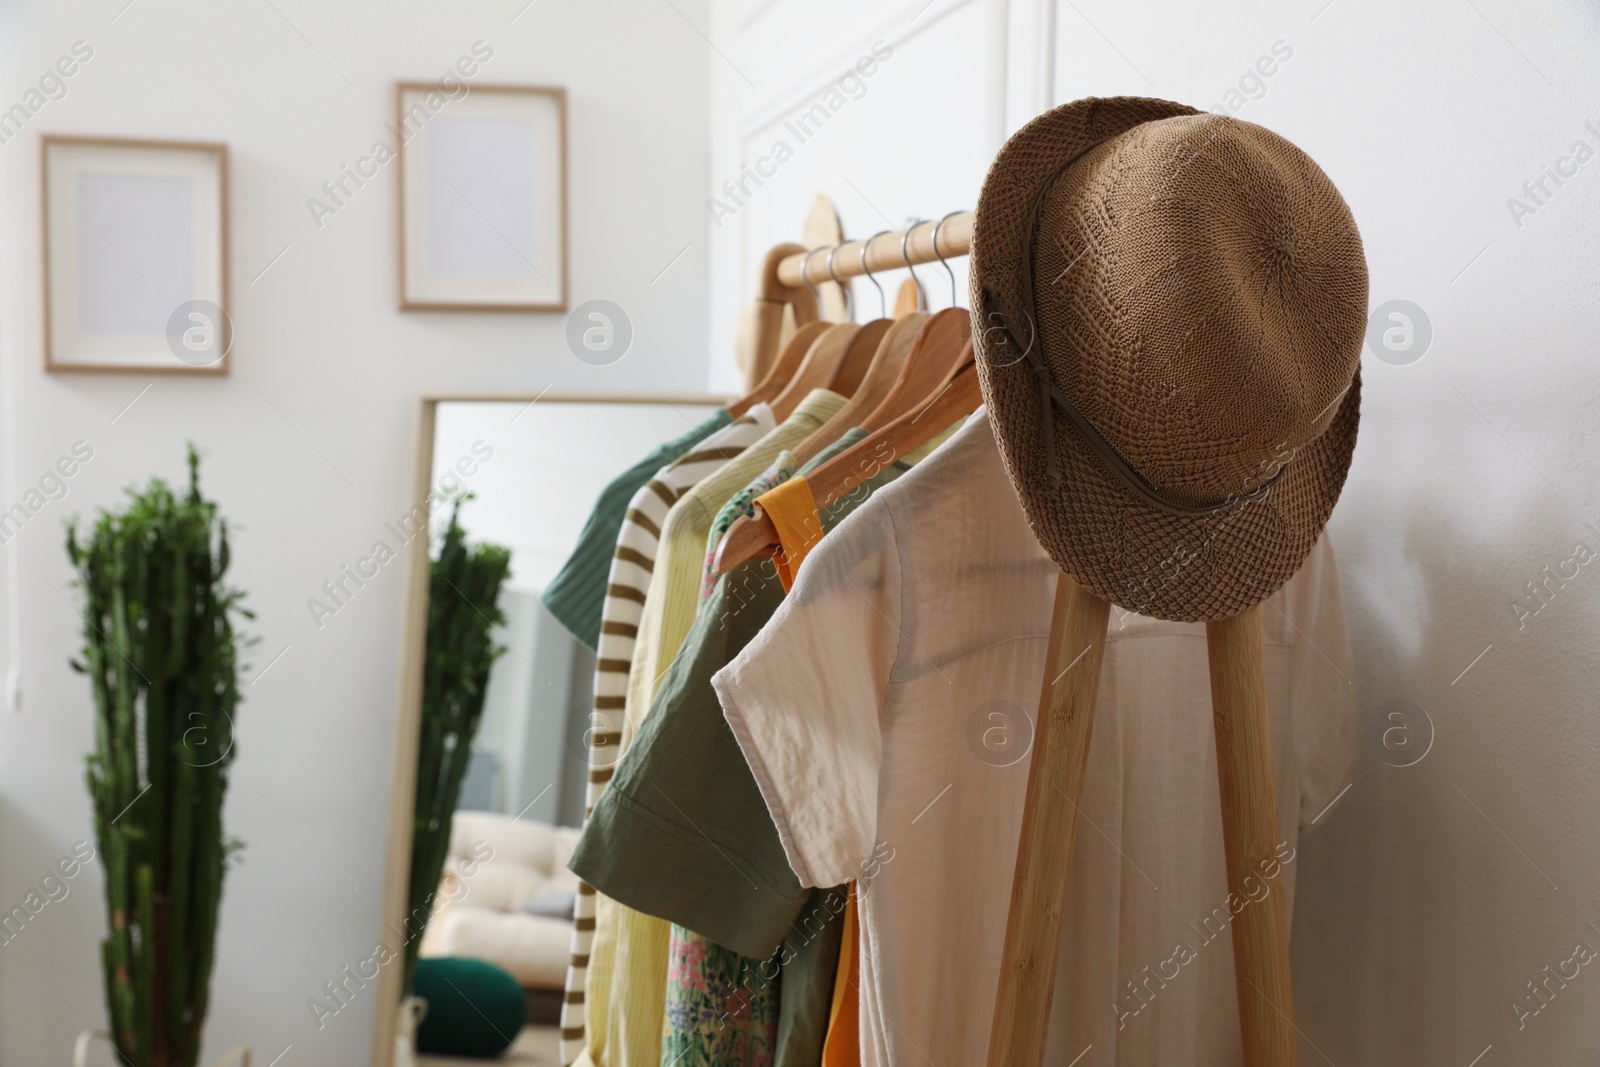 Photo of Rack with hanging clothes and straw hat indoors. Interior design